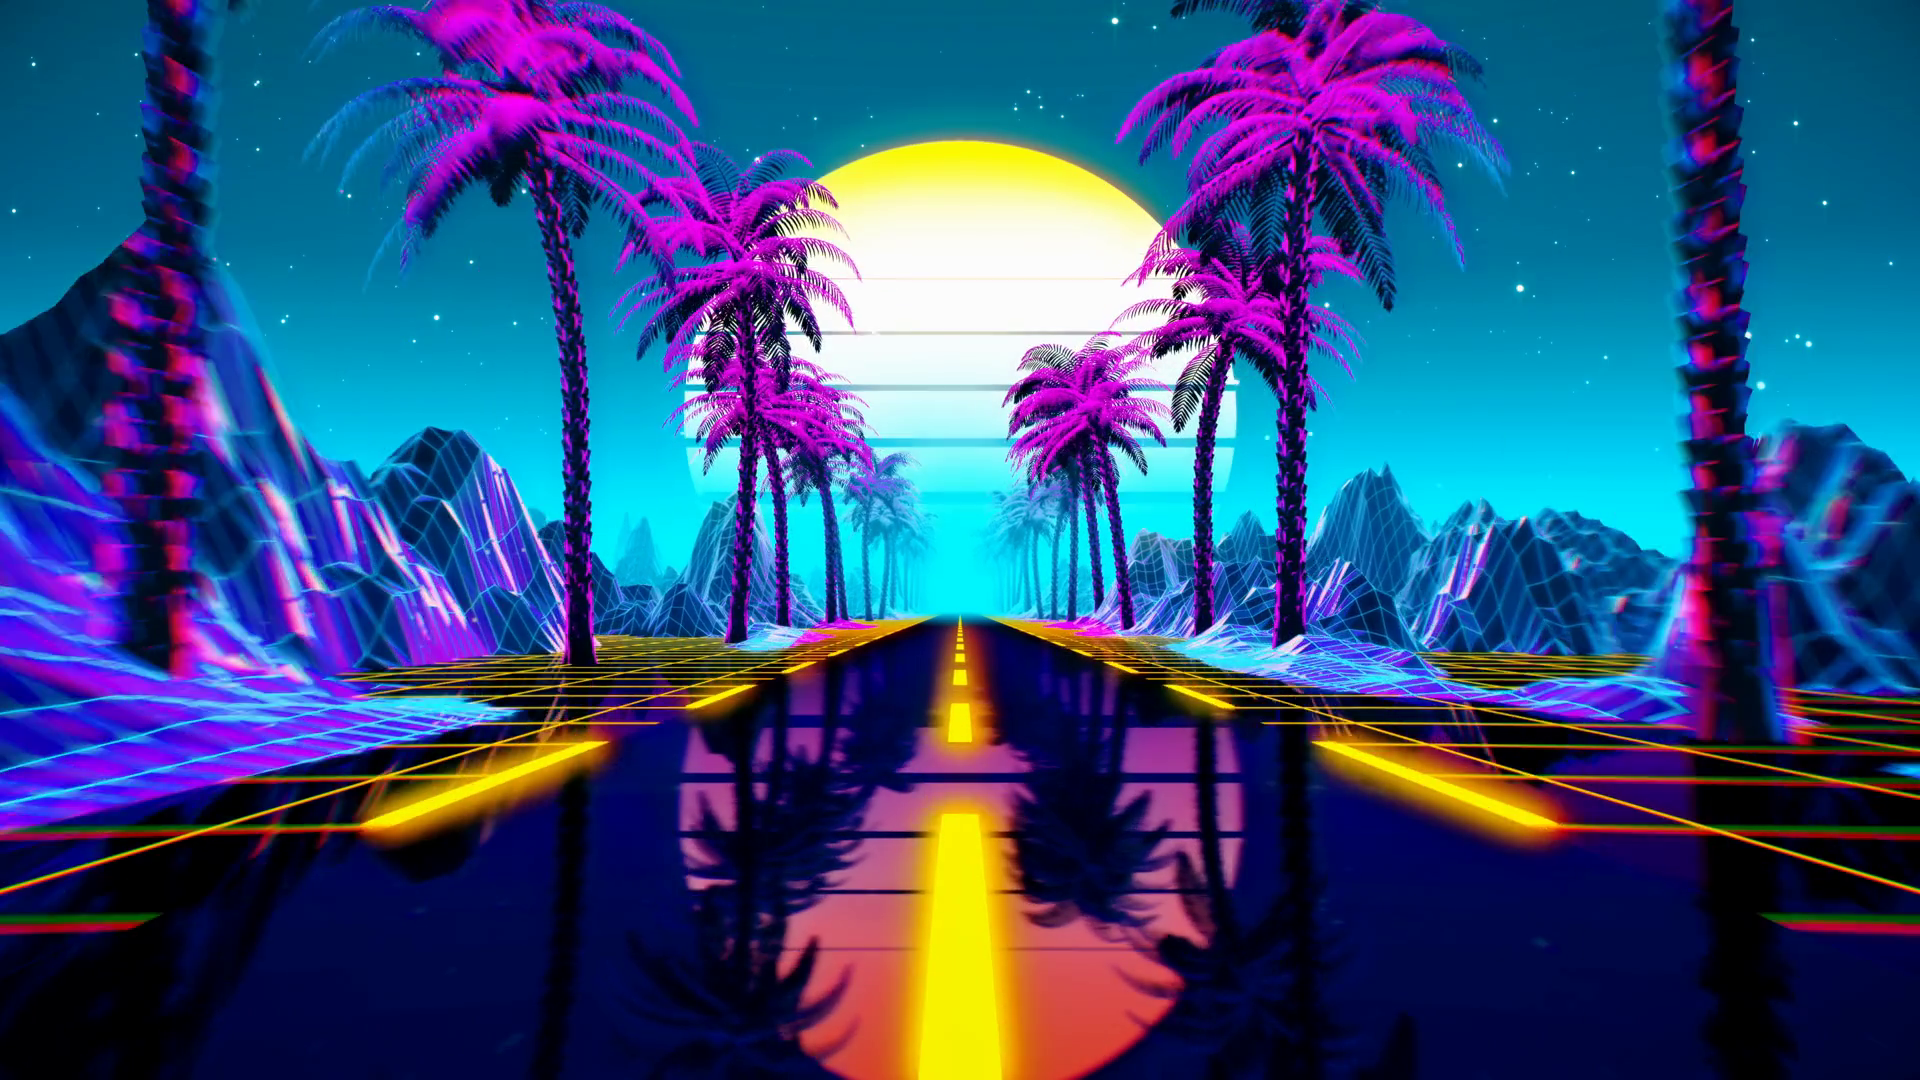 80s Retro Futuristic Sci Fi Seamless Loop. Retrowave VJ Videogame Landscape, Neon Lights And Low Poly Terrain Grid. Stylized Vintage Vaporwave 3D Animation Background With Mountains, Sun And Stars. 4K Motion Background